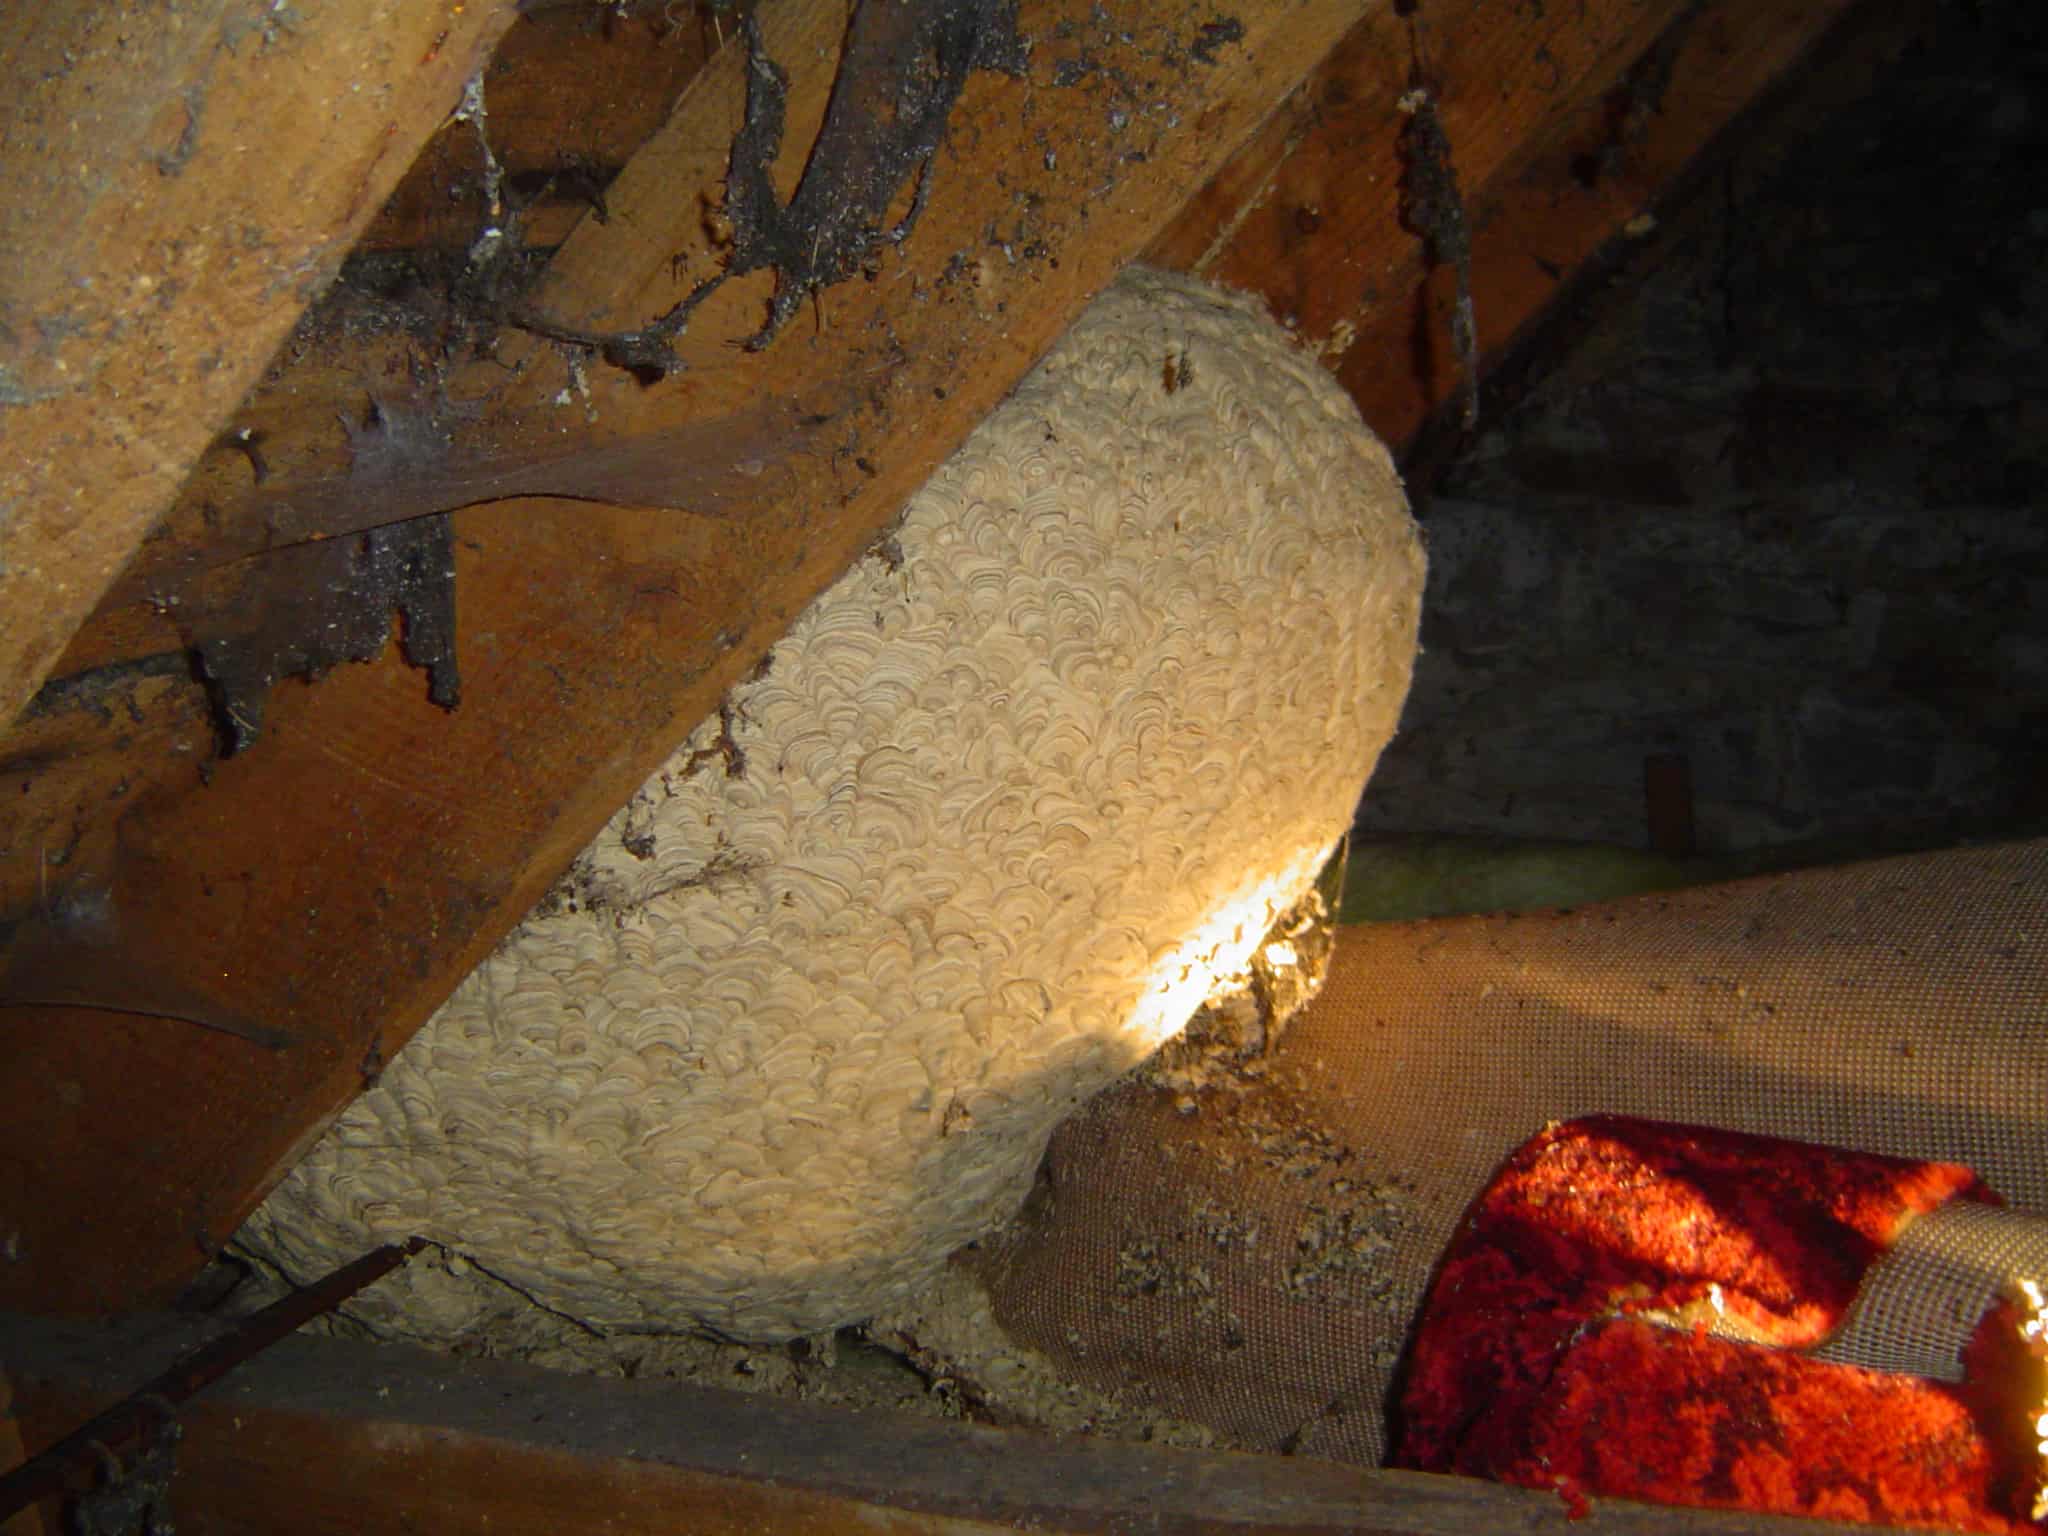 A 60cm wide wasp nest in an attic